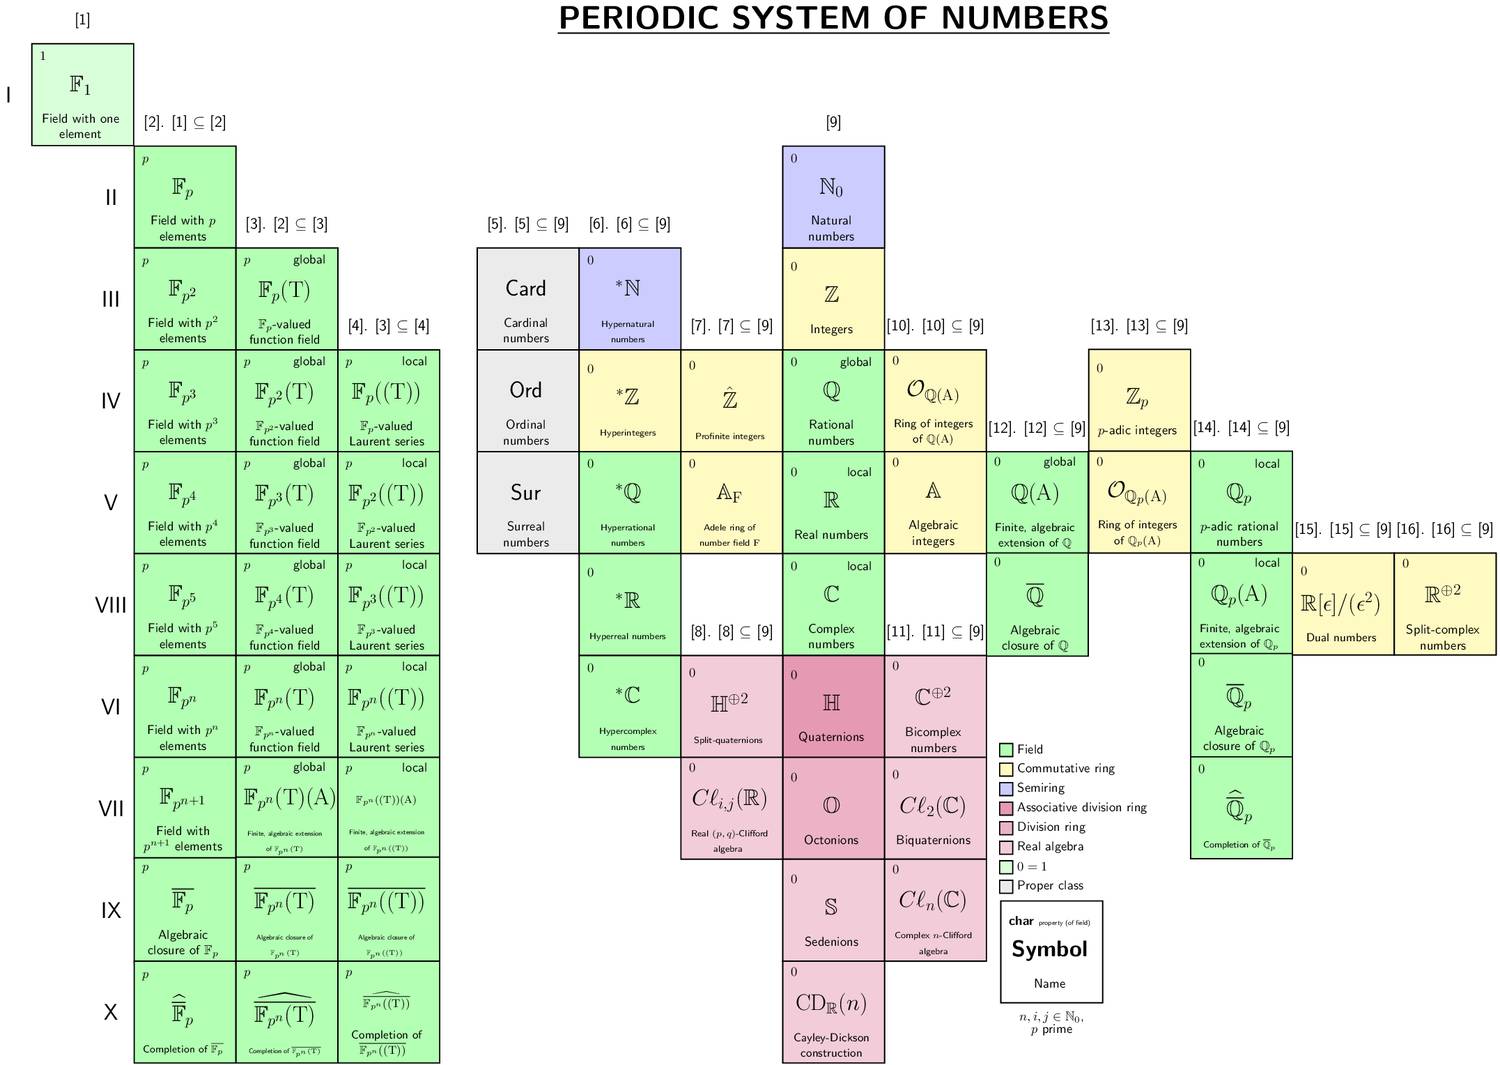 P elements. Periodic System. One function - elements. Real Algebraic numbers. Real numbers symbol.